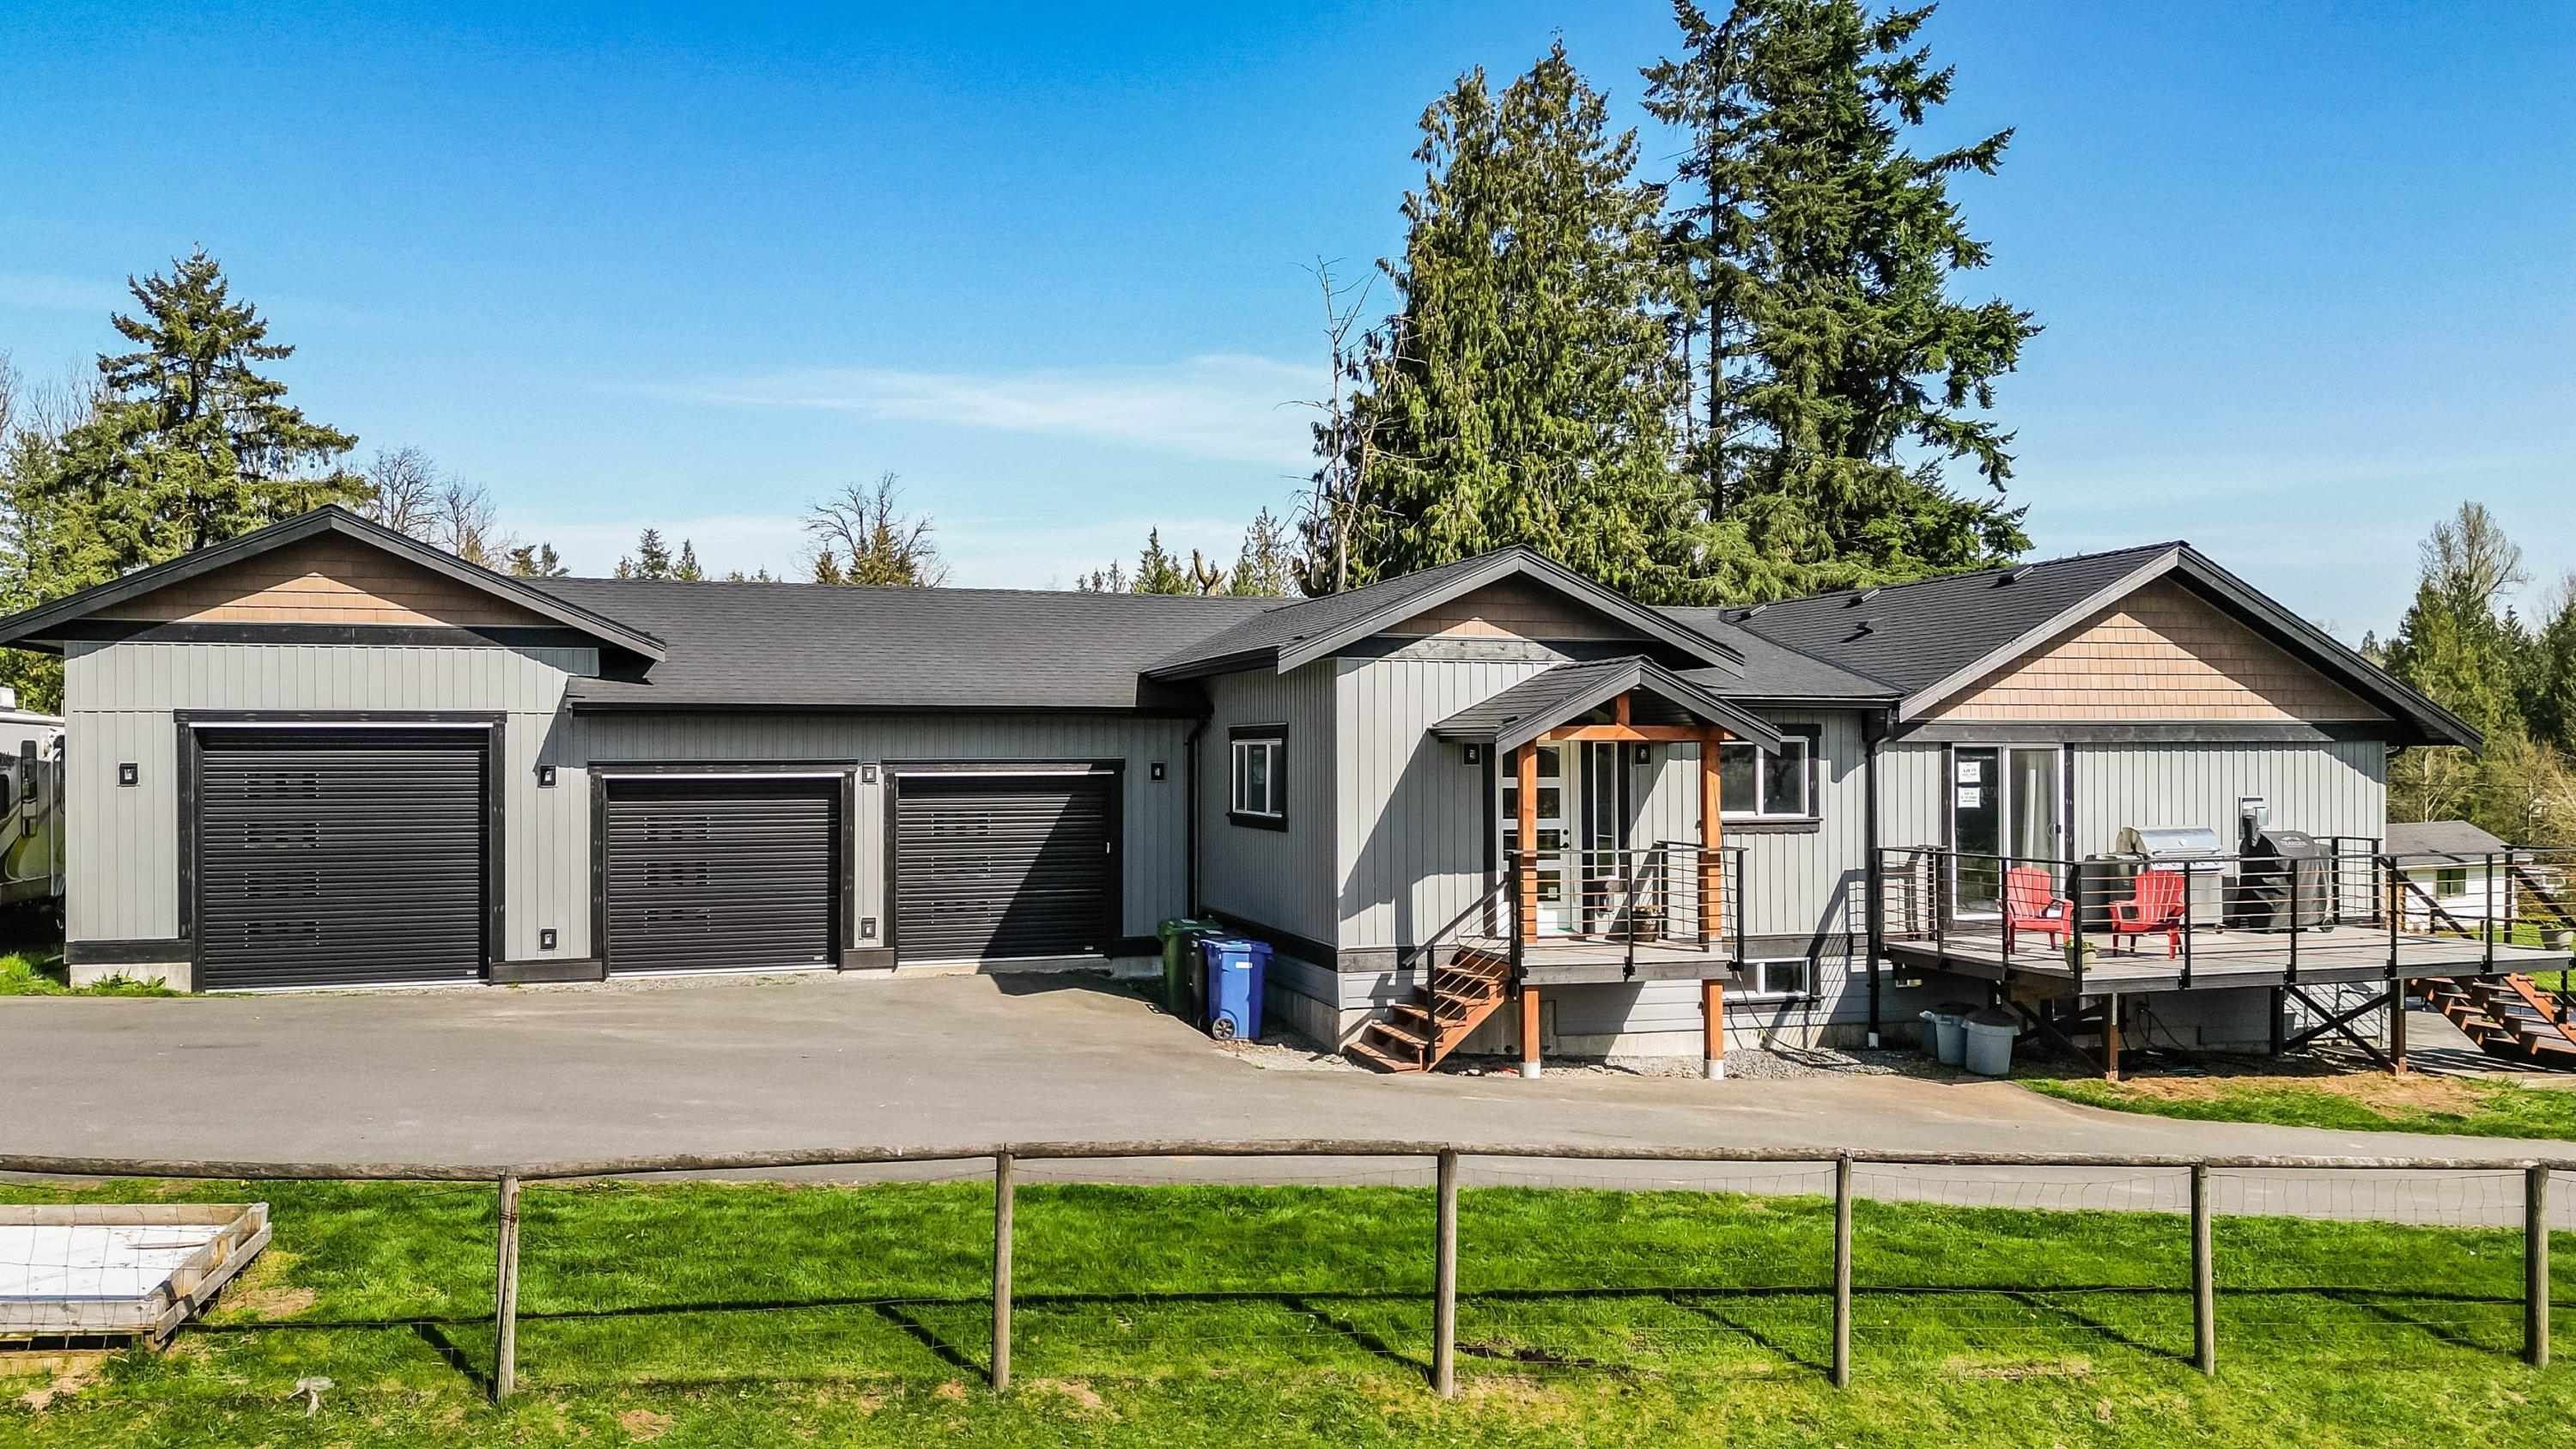 Welcome to this beautiful 5 Acre hobby farm at 29043 58 Ave. in Bradner, Abbotsford!